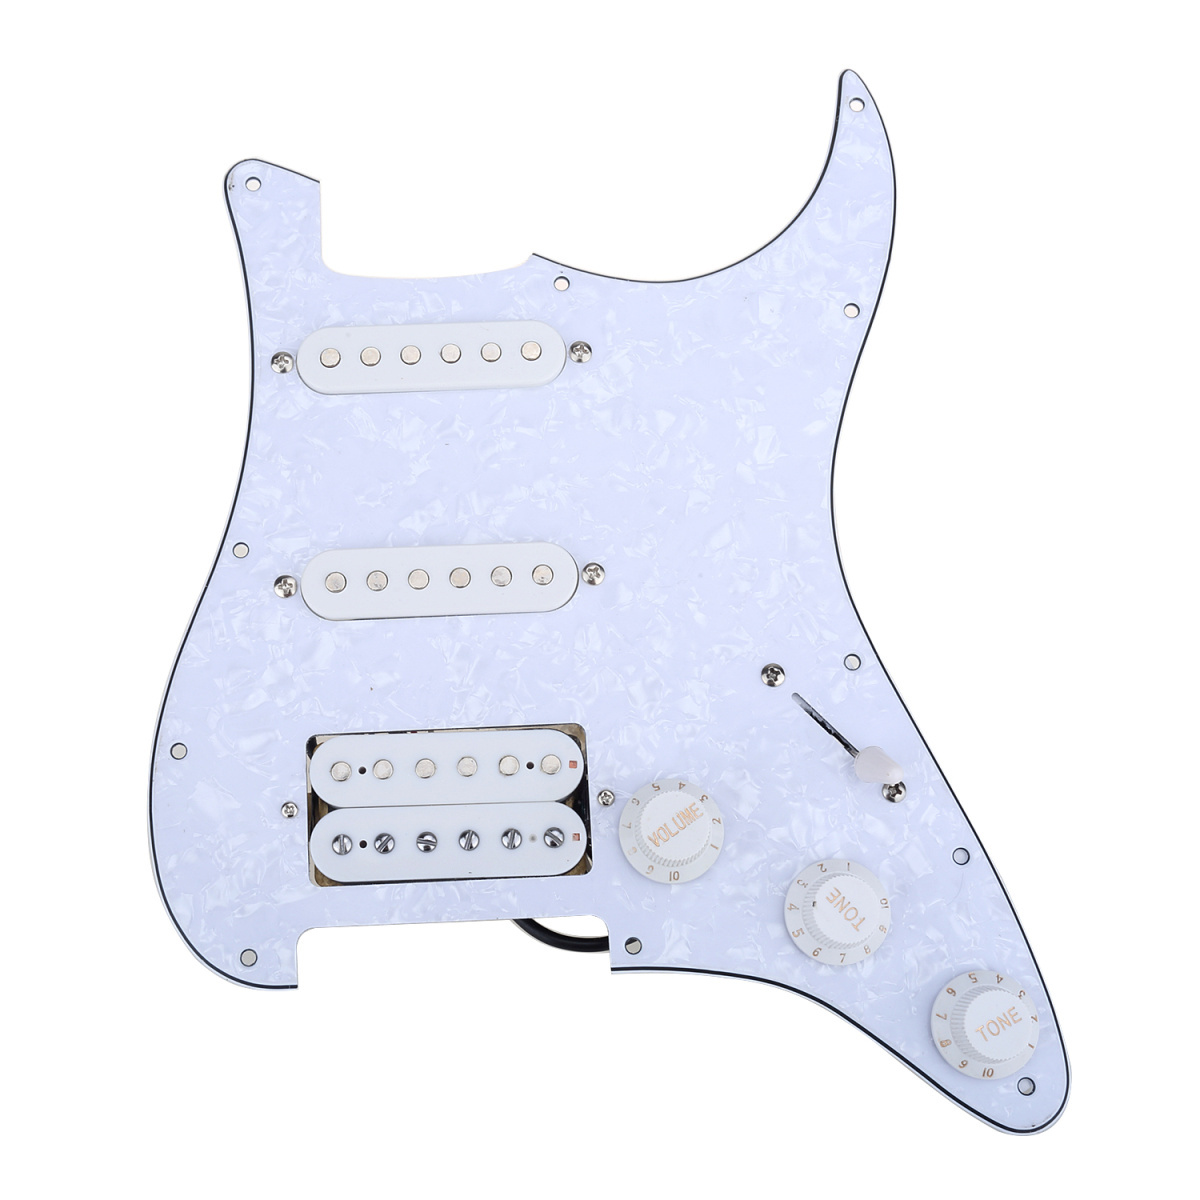 Value Musiclily 11 Hole Loaded Strat Pickguard HSS Prewired